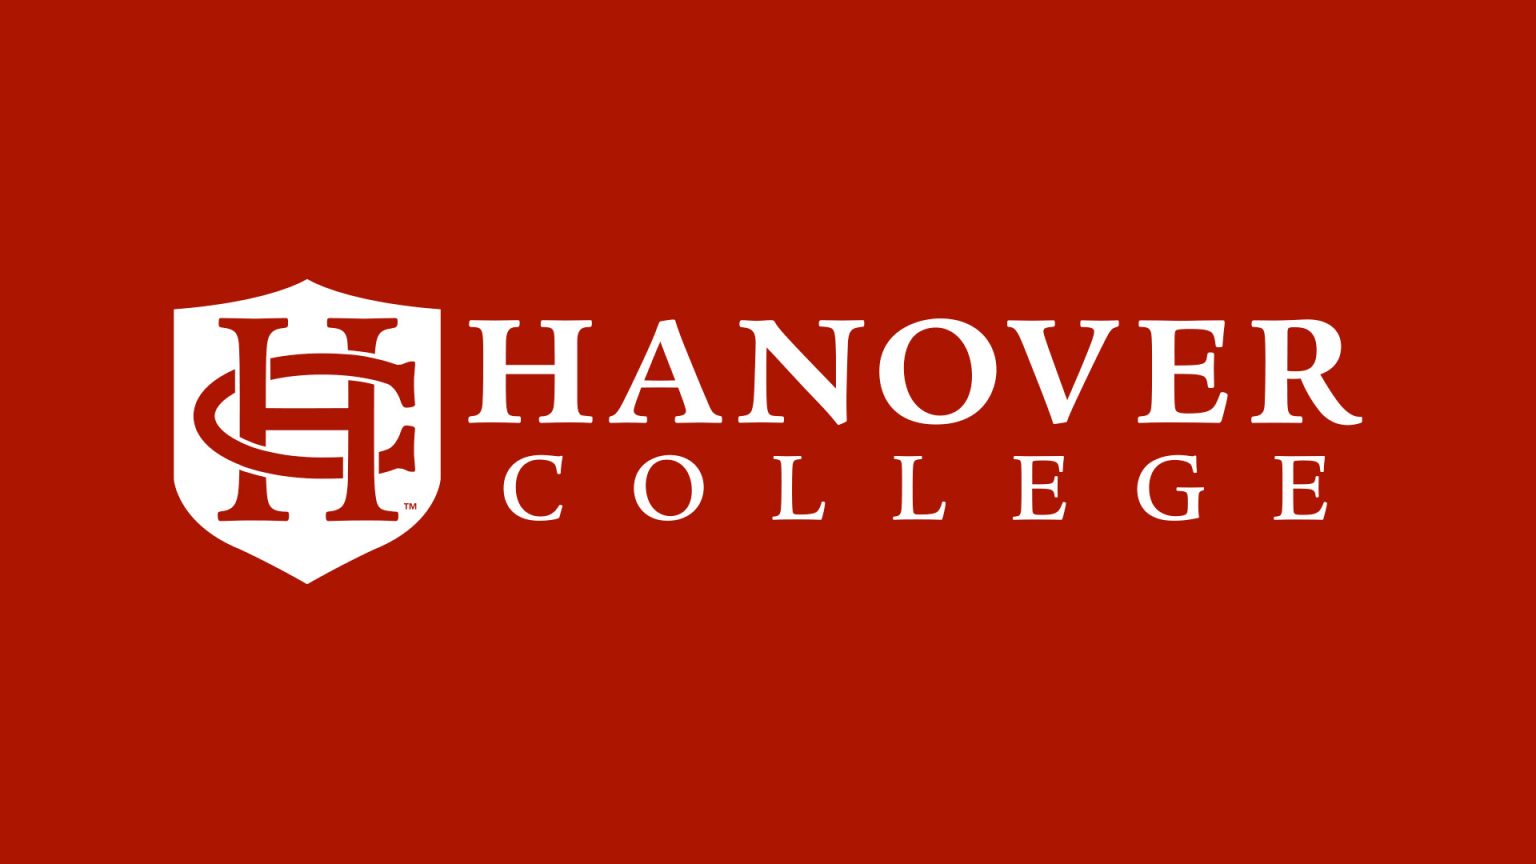 hanover-launches-new-unified-logo-and-branding-hanover-college